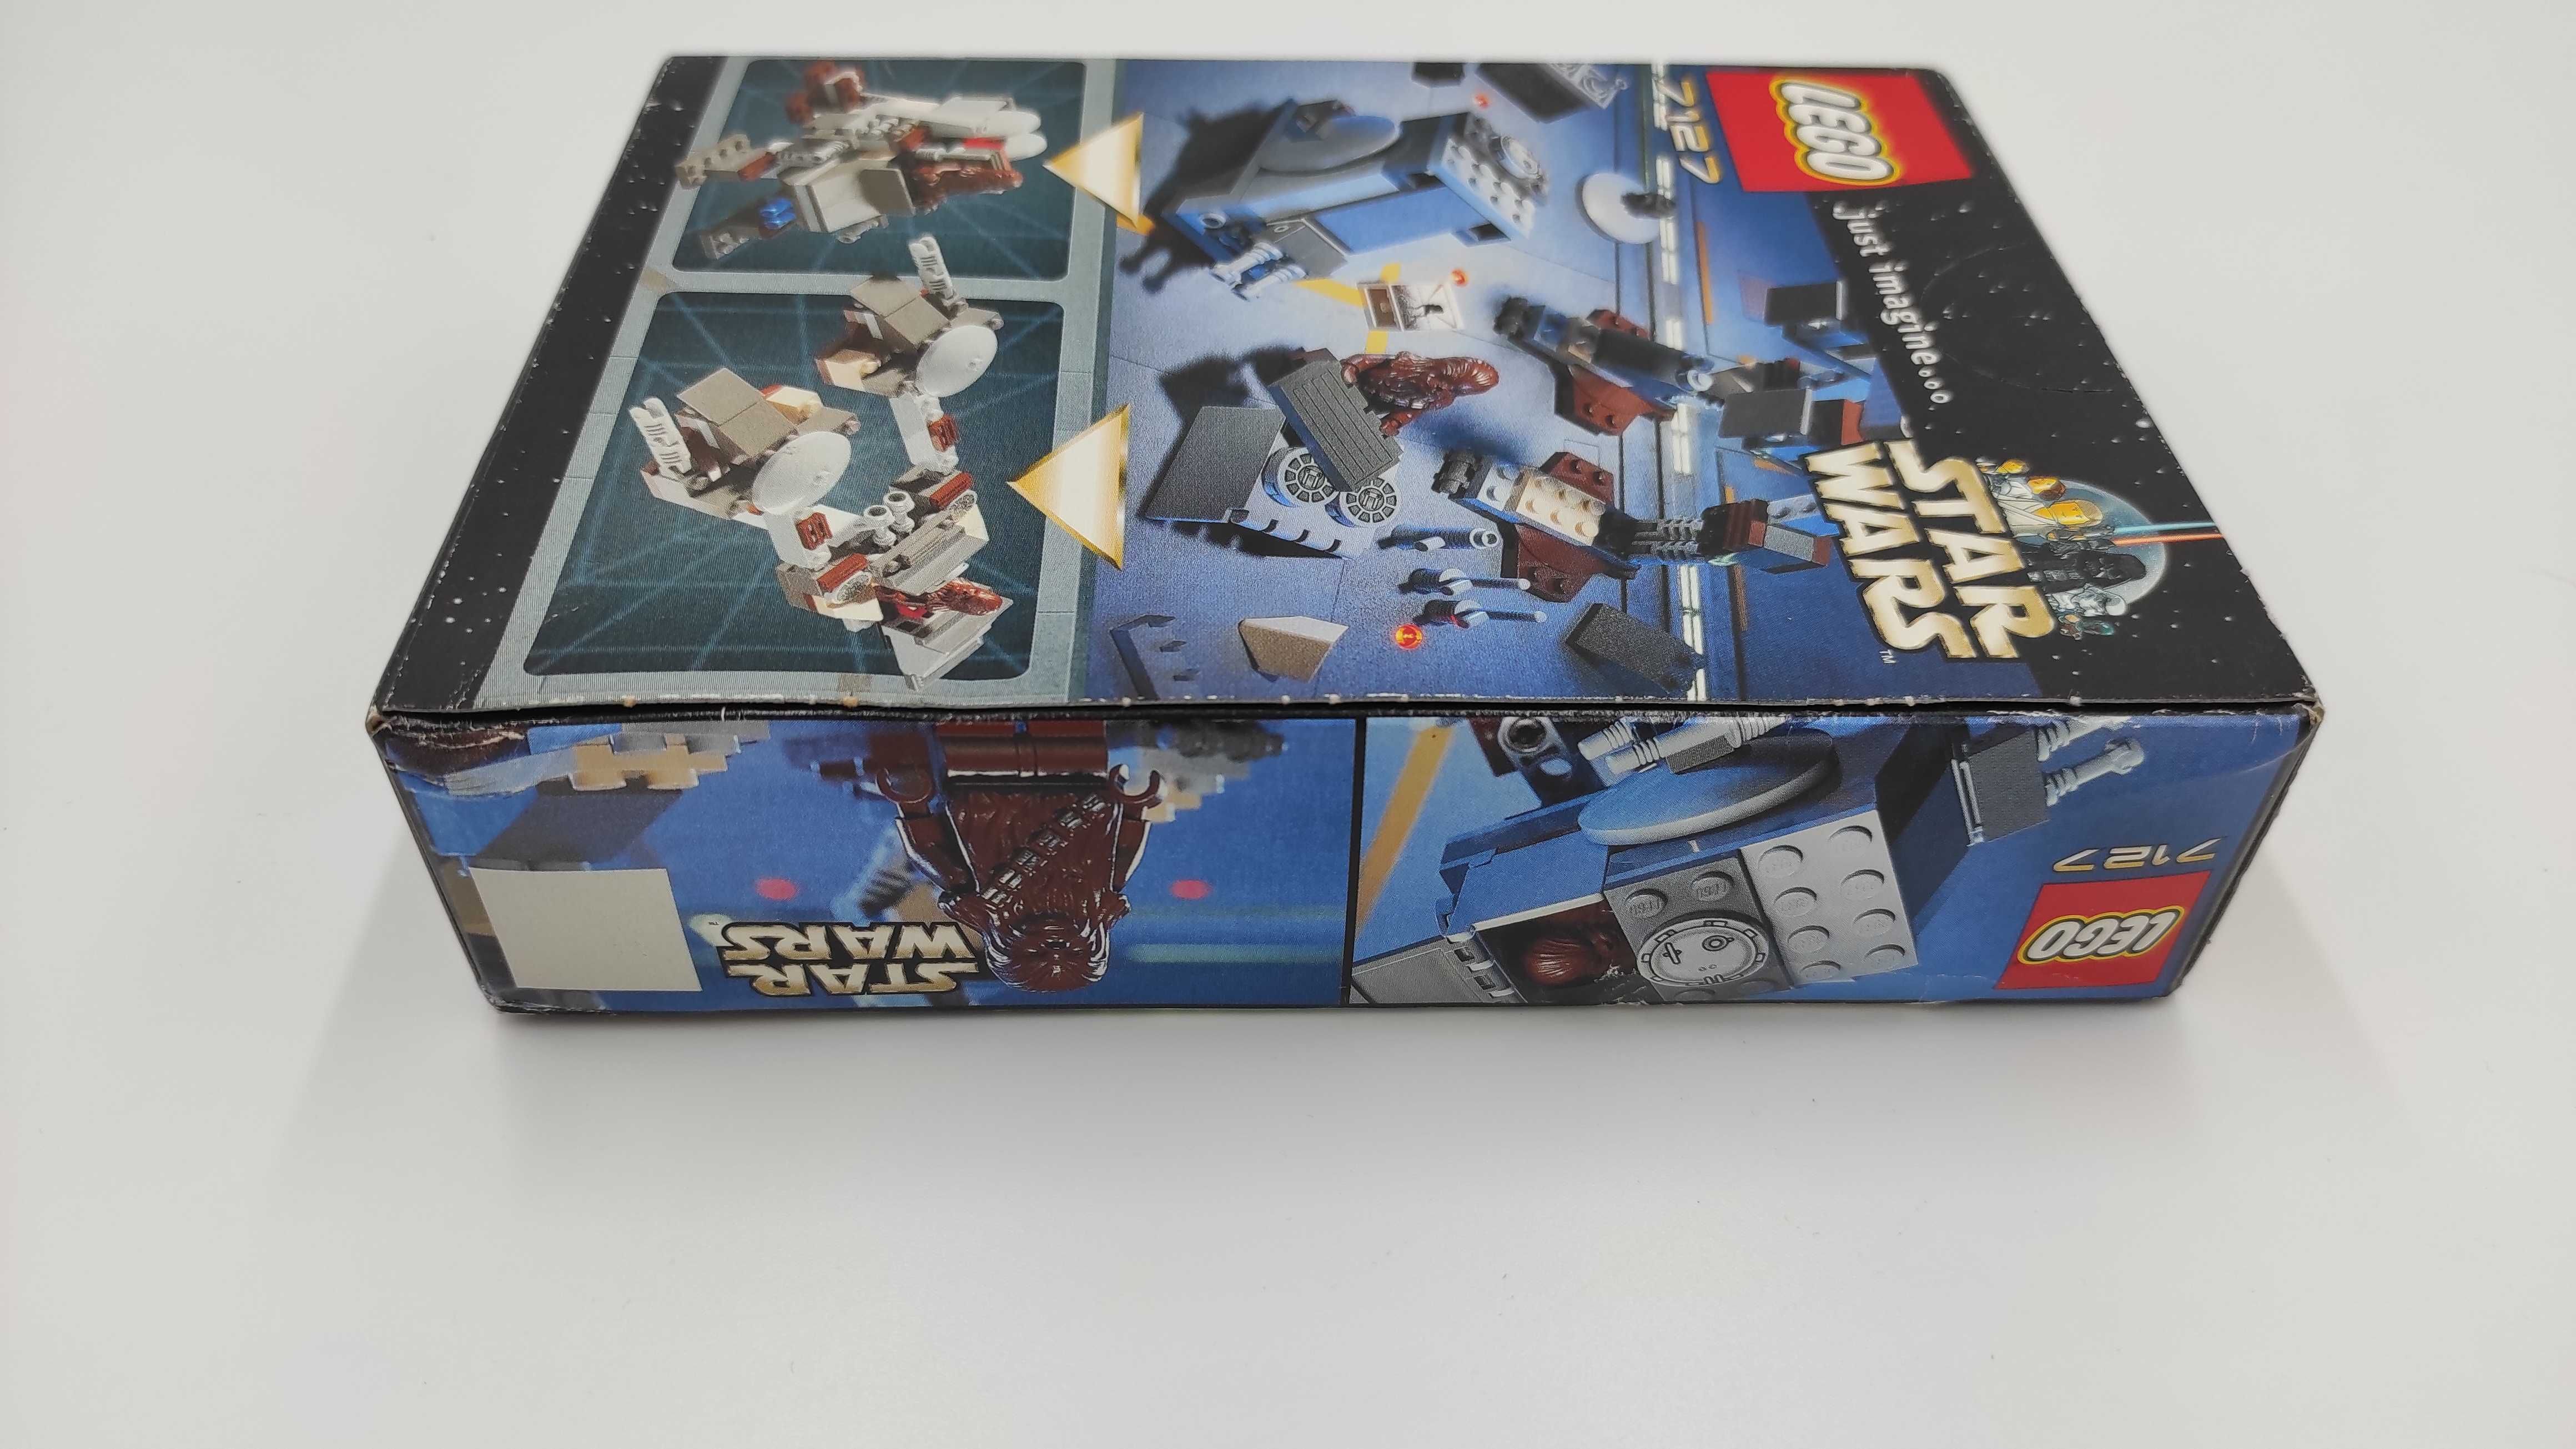 NOWY Lego Star Wars 7127 Imperial AT-ST (2001)